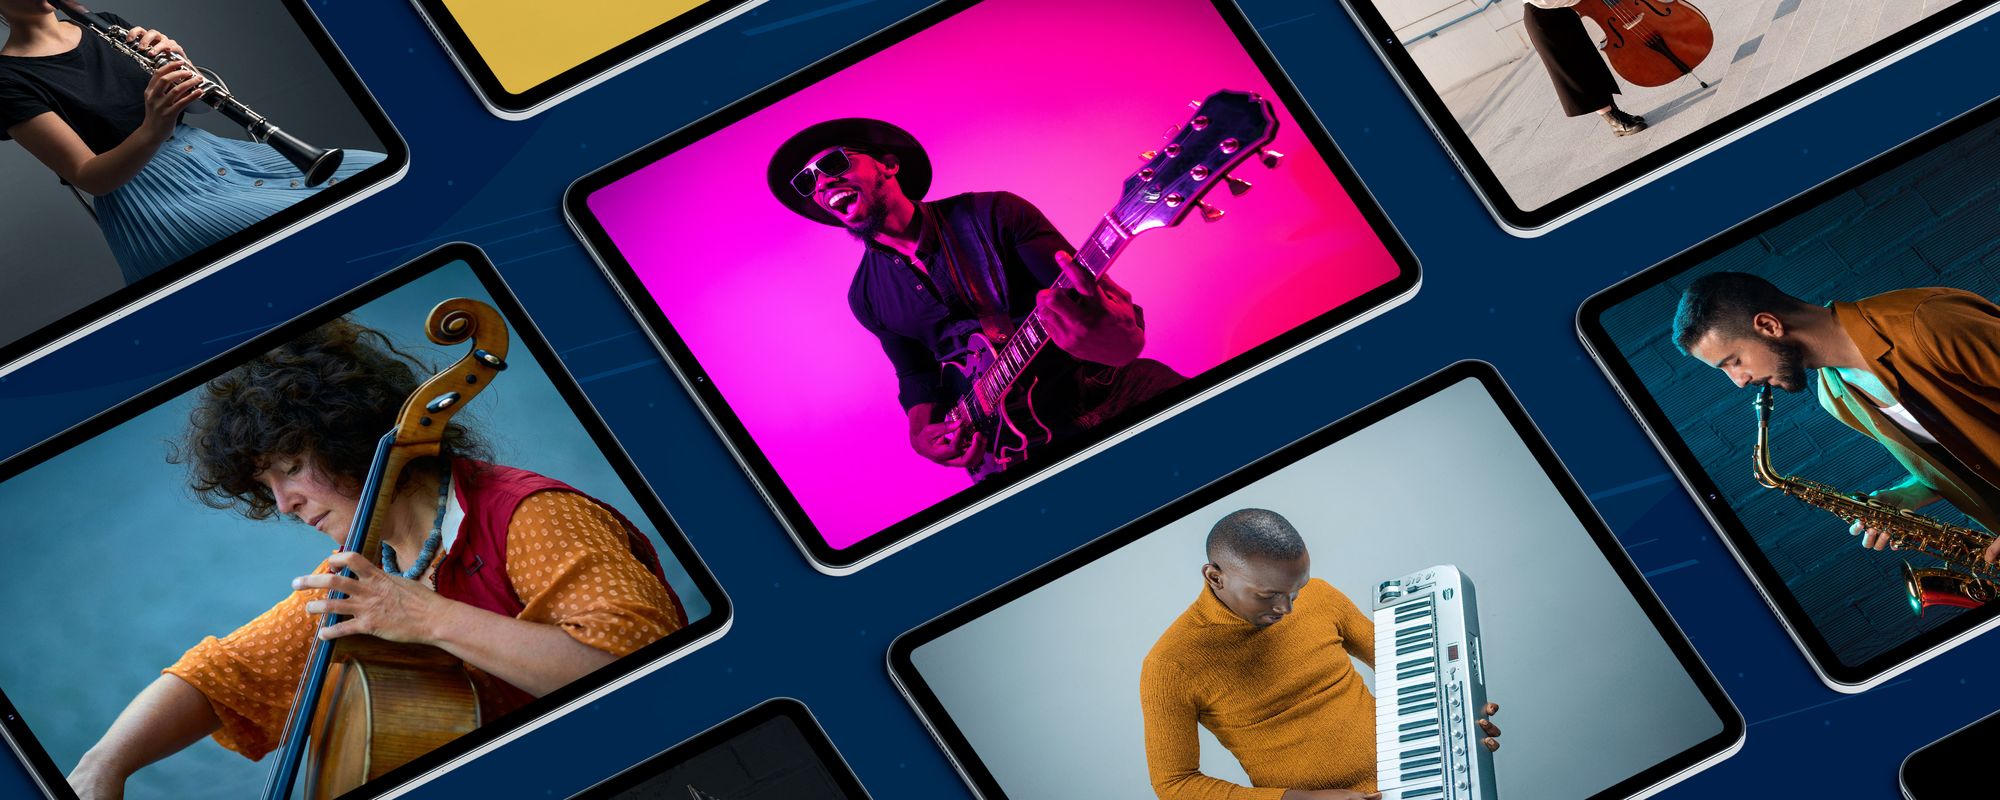 Different screens featuring a variety of musicians to show the broad scope that music licensing covers.